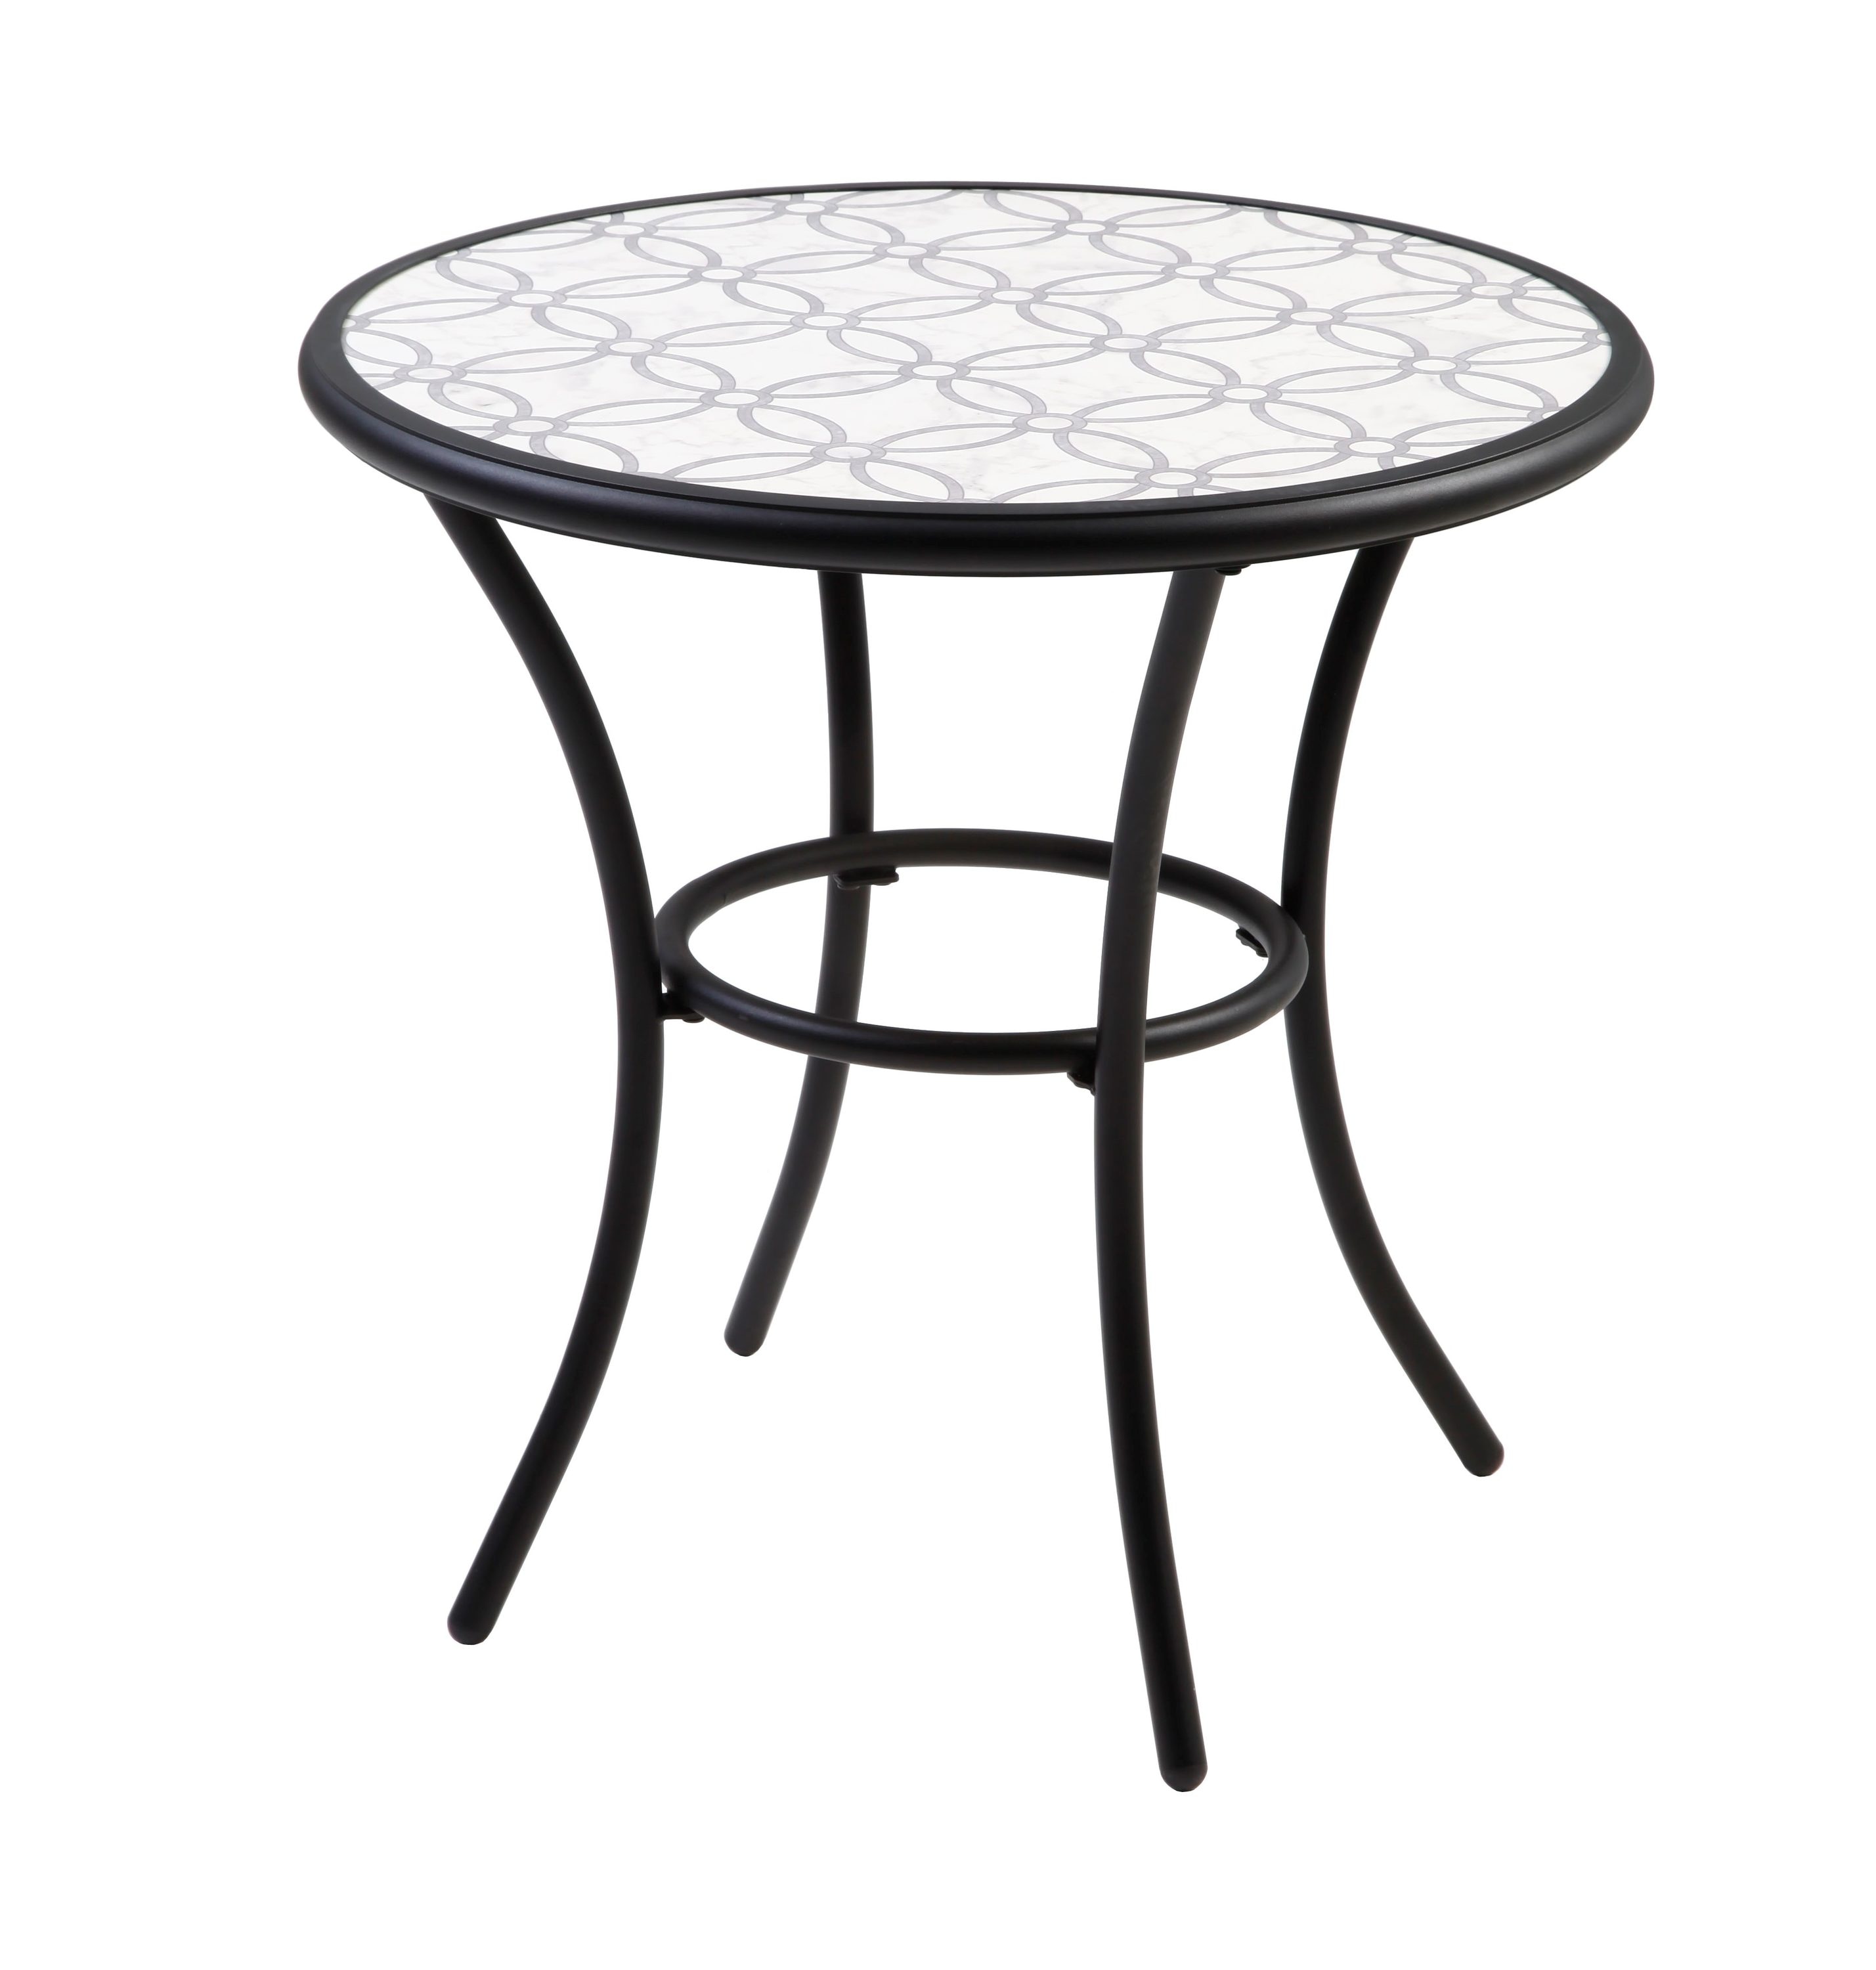 Outdoor table bistro table weatherproof Mosaic countertop and elegantly curved legs